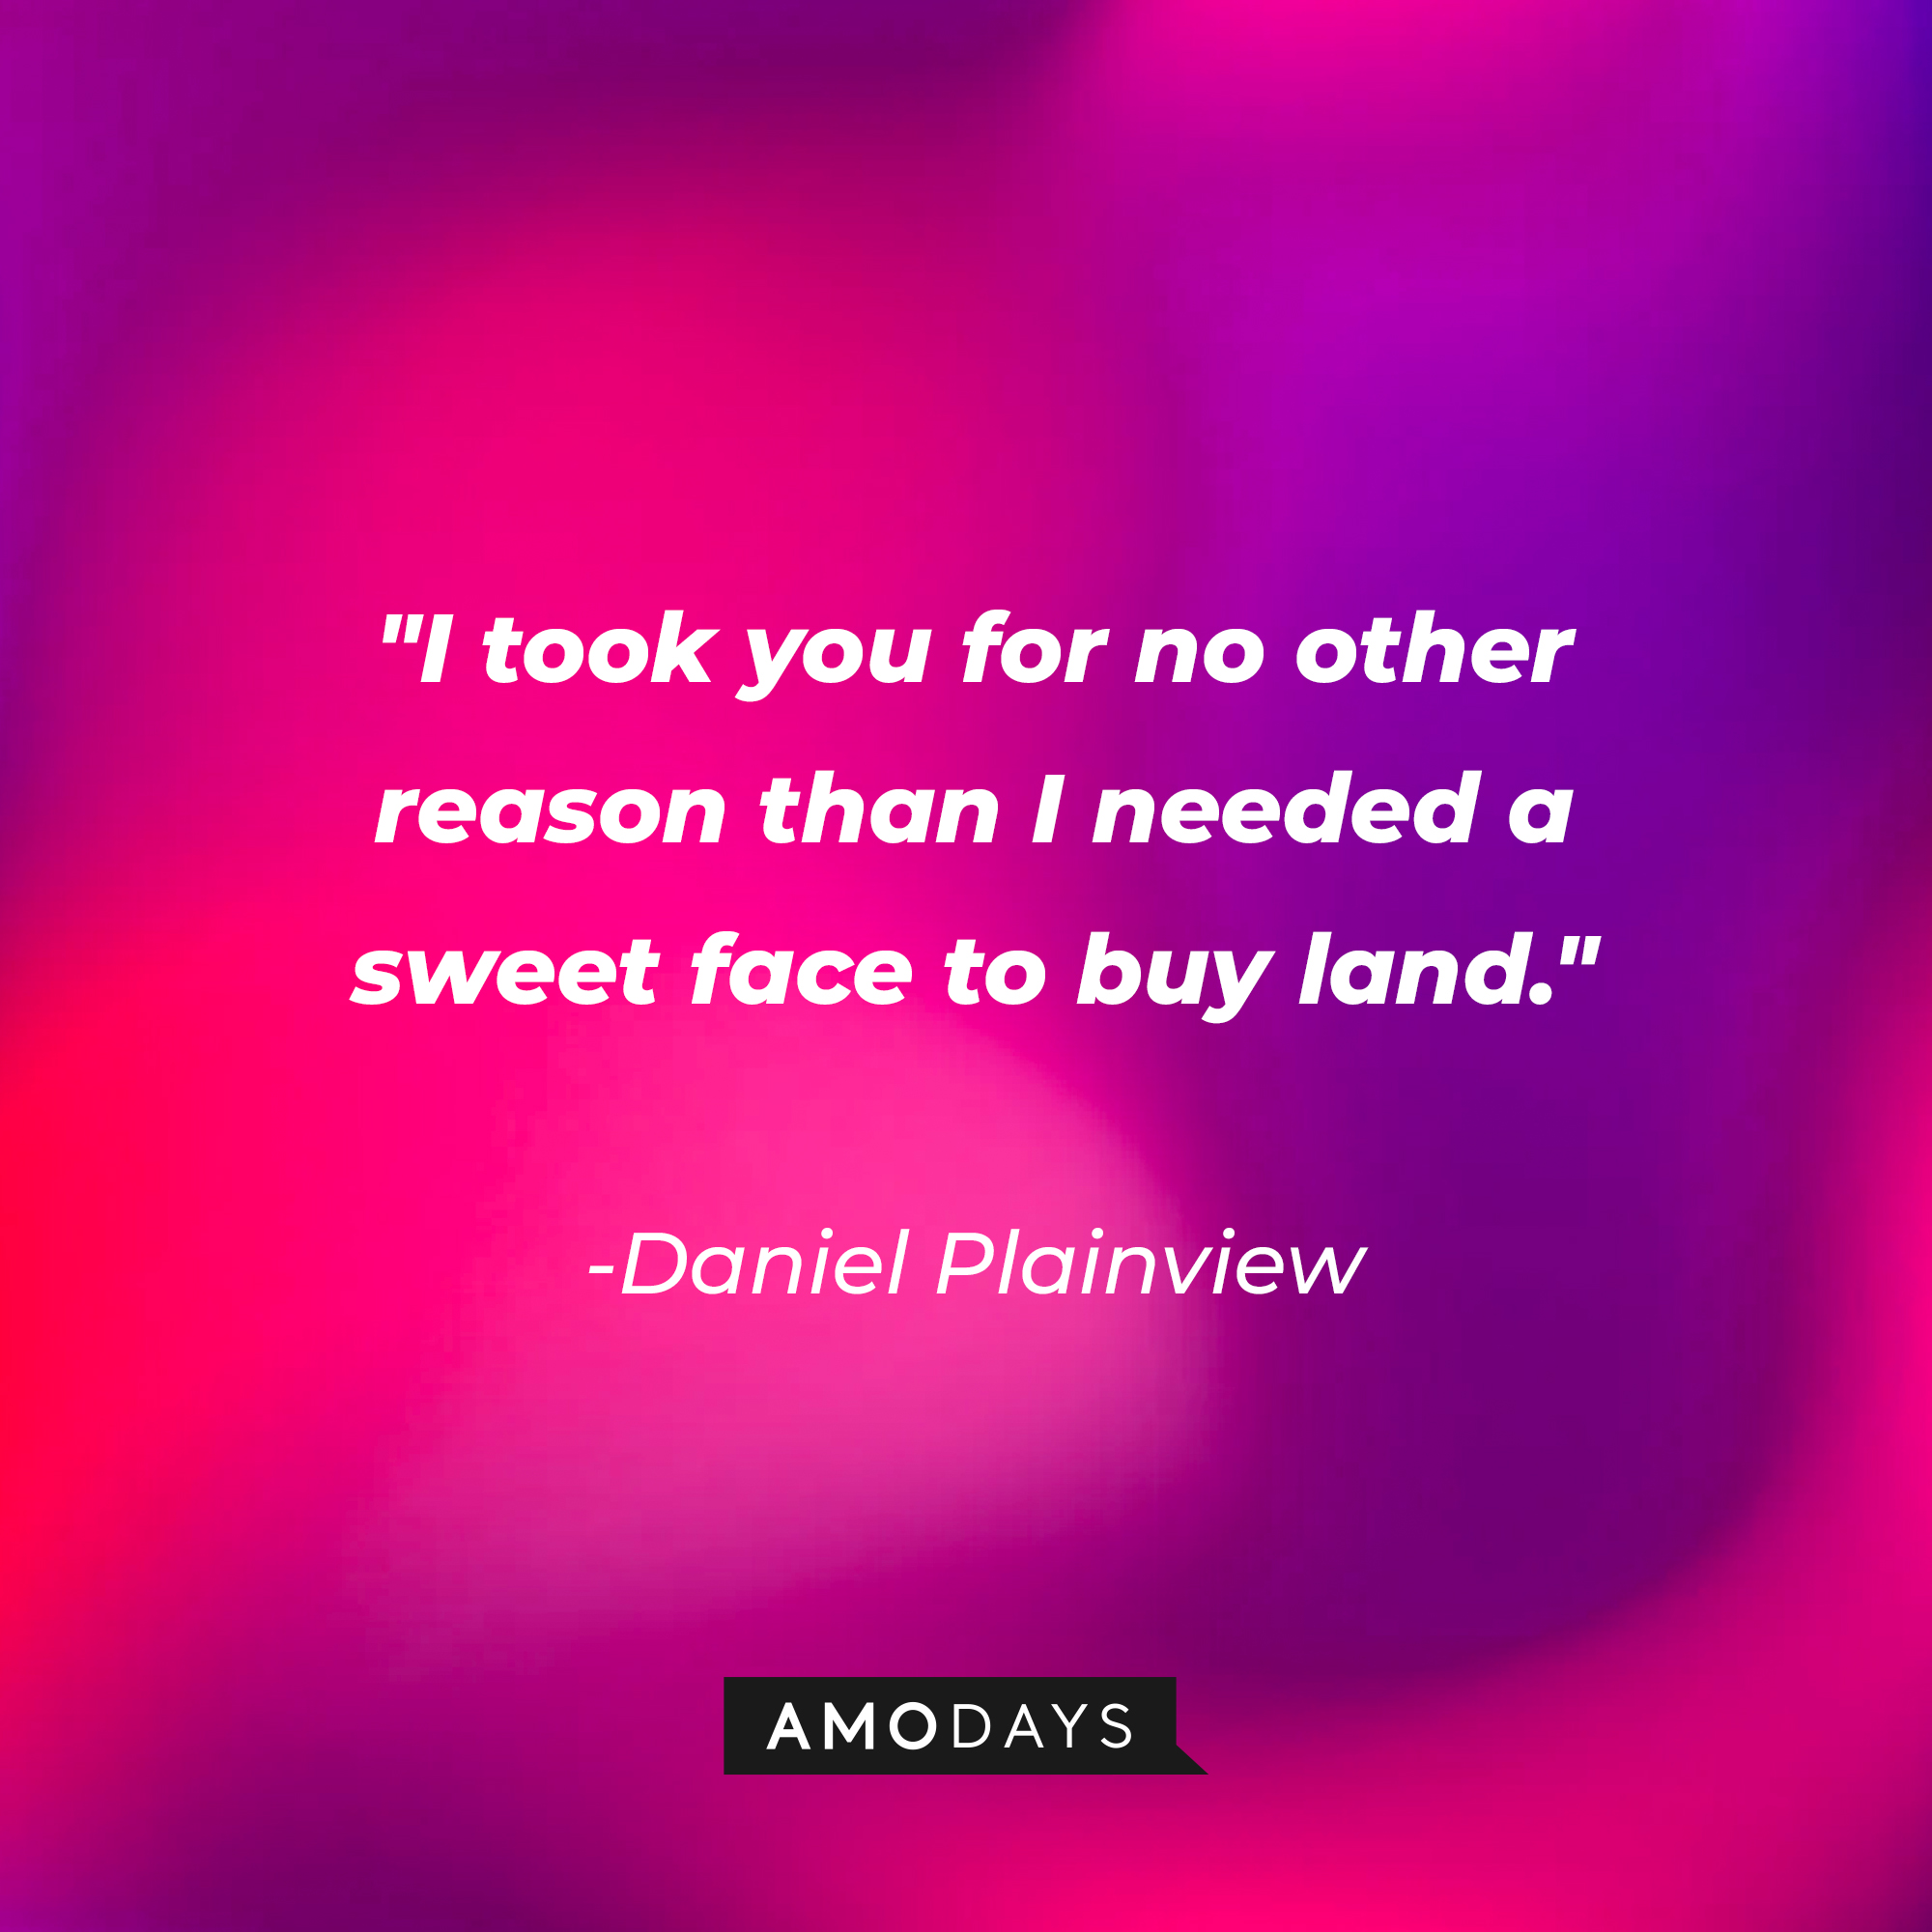 Daniel Plainview’s quote: “I took you for no other reason than I needed a sweet face to buy land." | Source: AmoDays